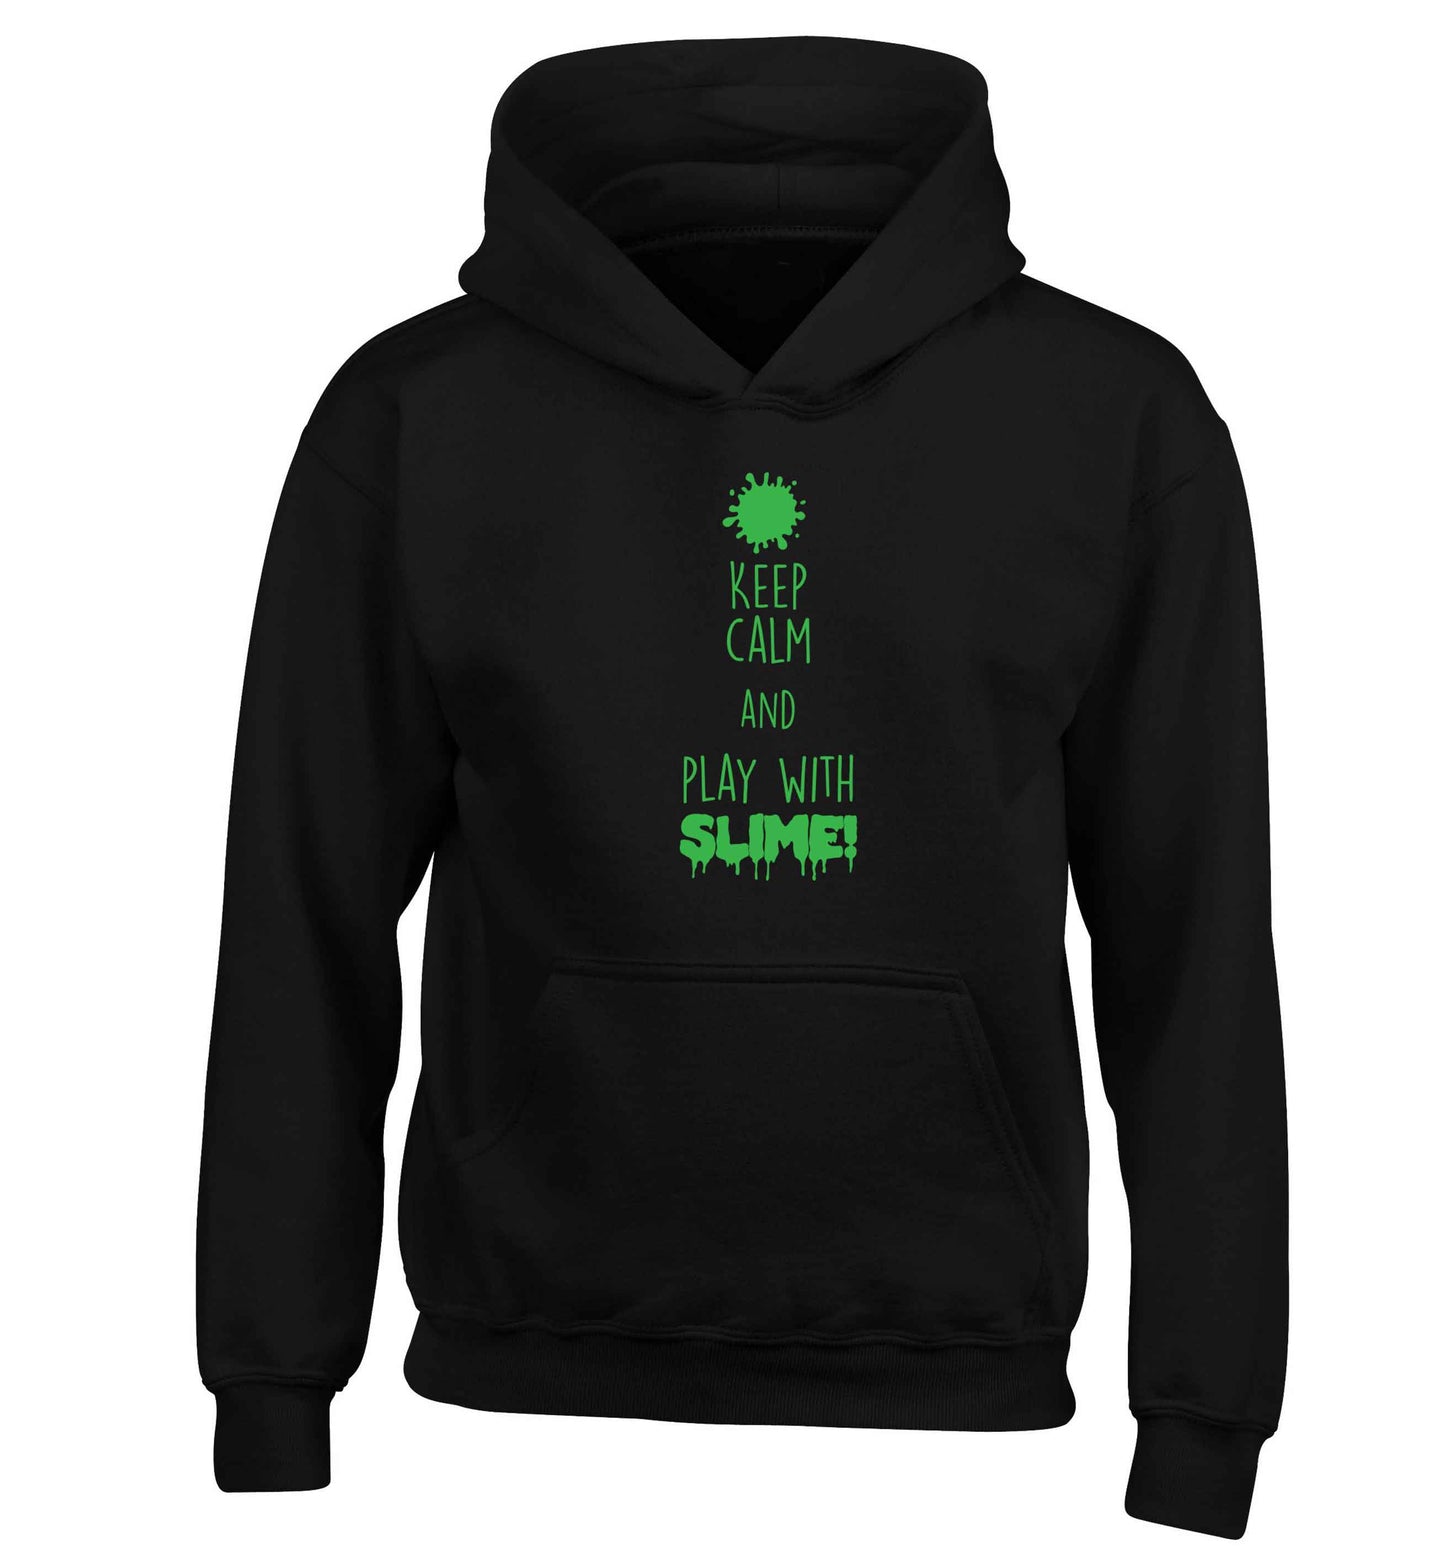 Neon green keep calm and play with slime!children's black hoodie 12-13 Years